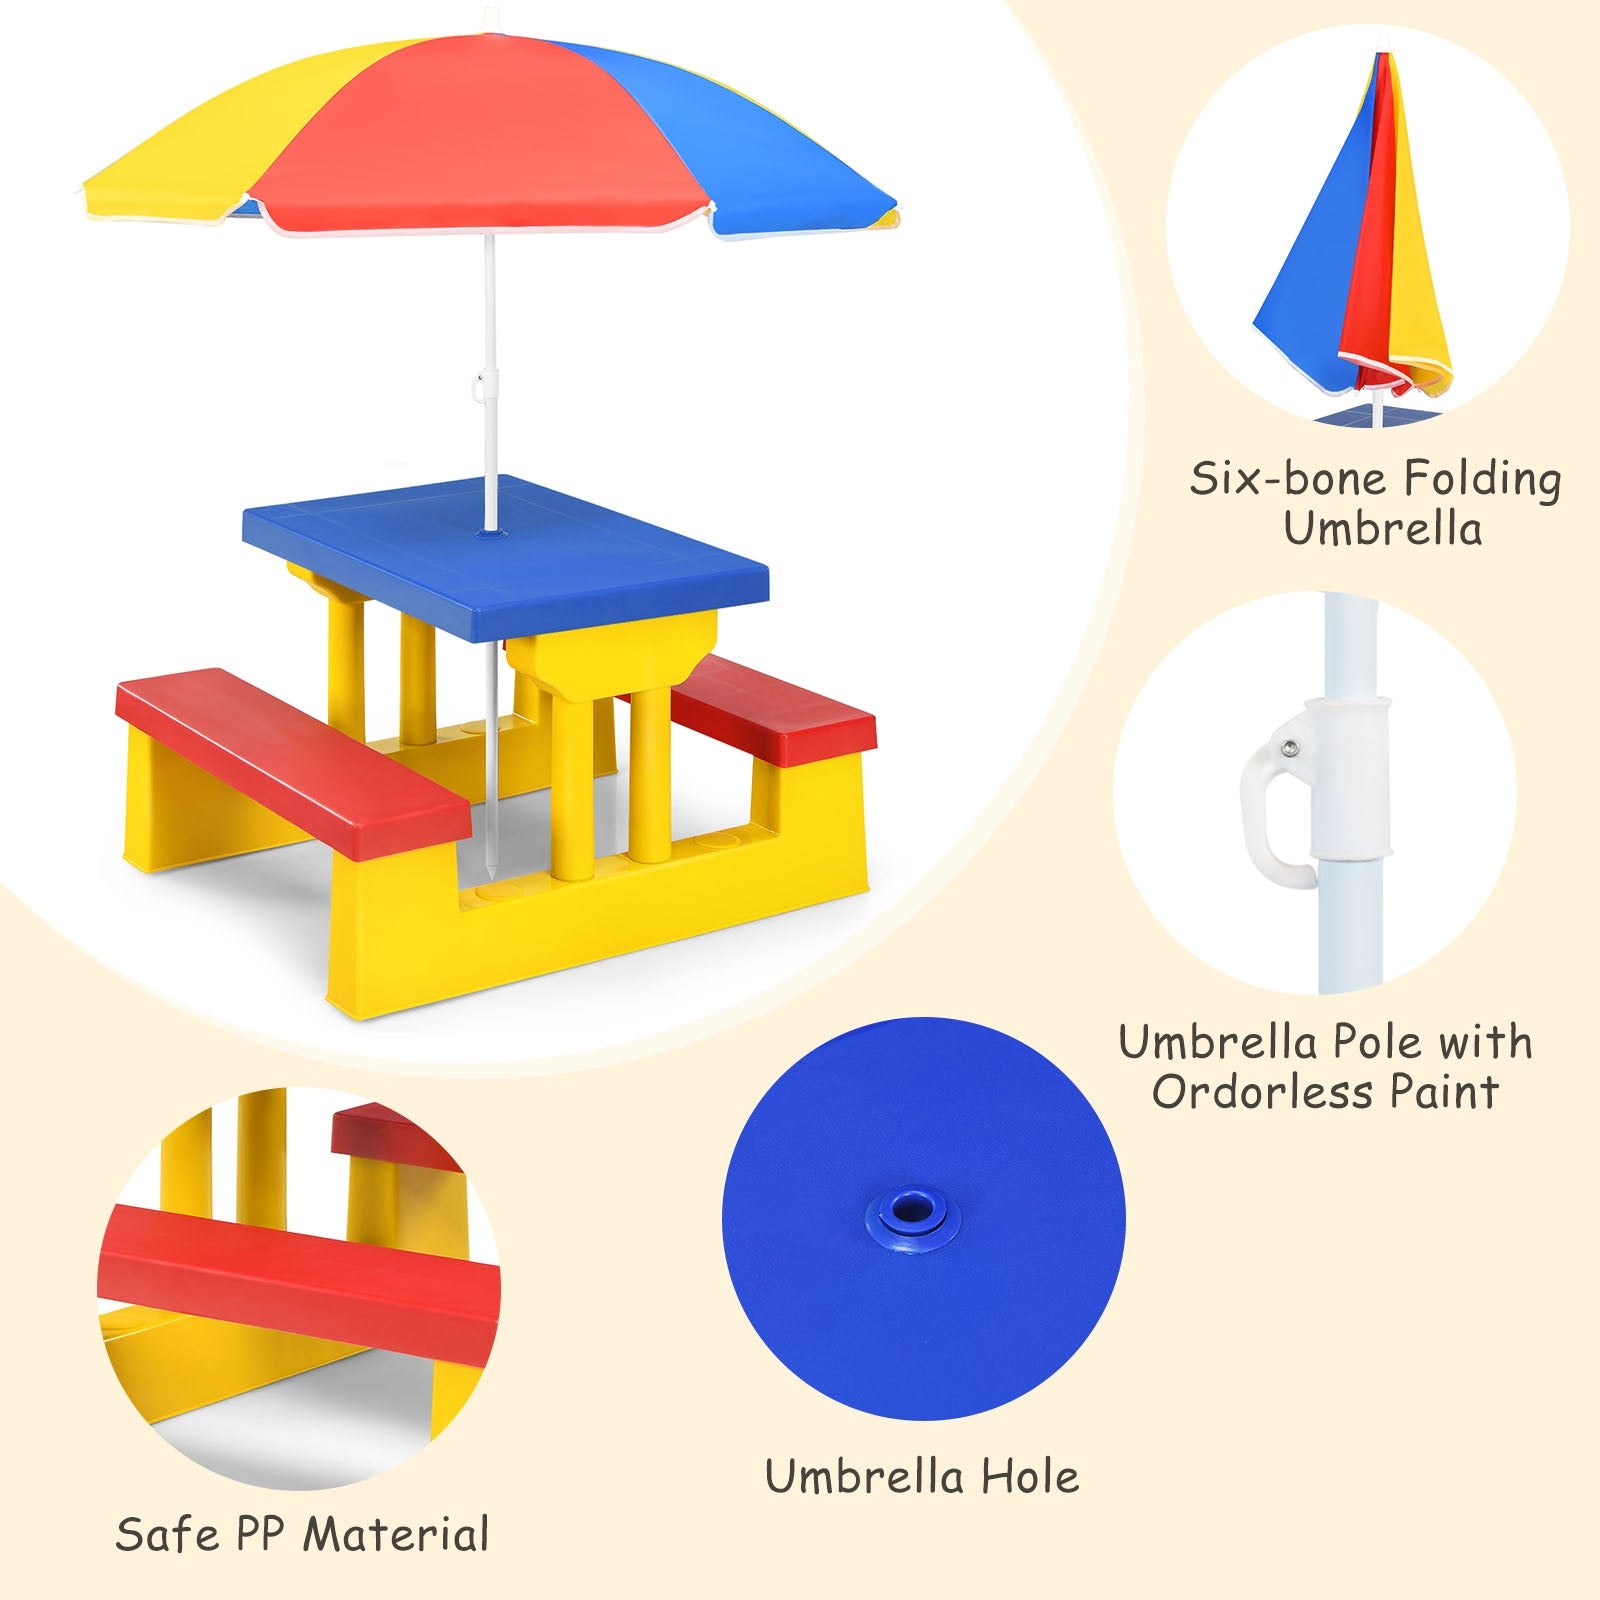 Safe and Sturdy Construction: Crafted from high-quality, non-toxic PP material, this picnic table ensures safety for kids and boasts a sturdy construction with excellent weight capacity. The accompanying umbrella is constructed from durable 170T nylon, ensuring long-lasting use.